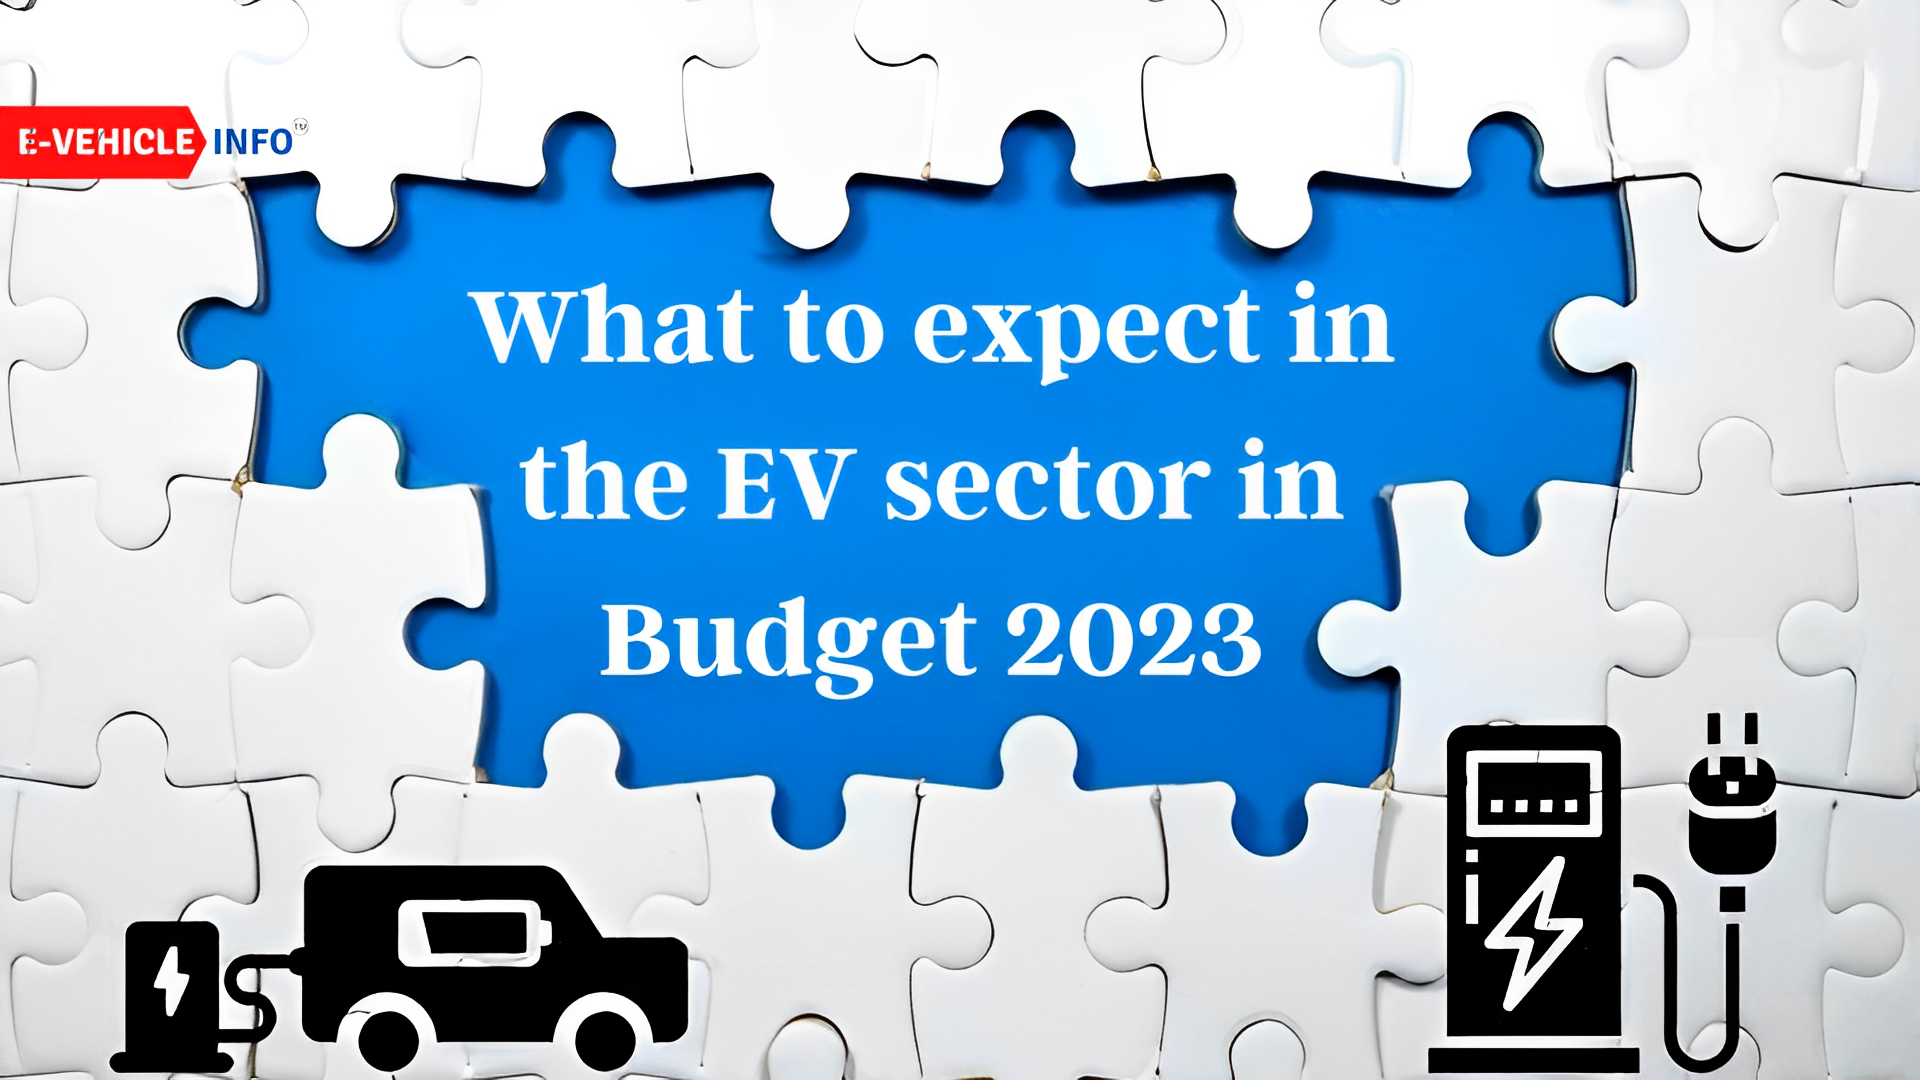 What to expect in the EV sector in Budget 2023